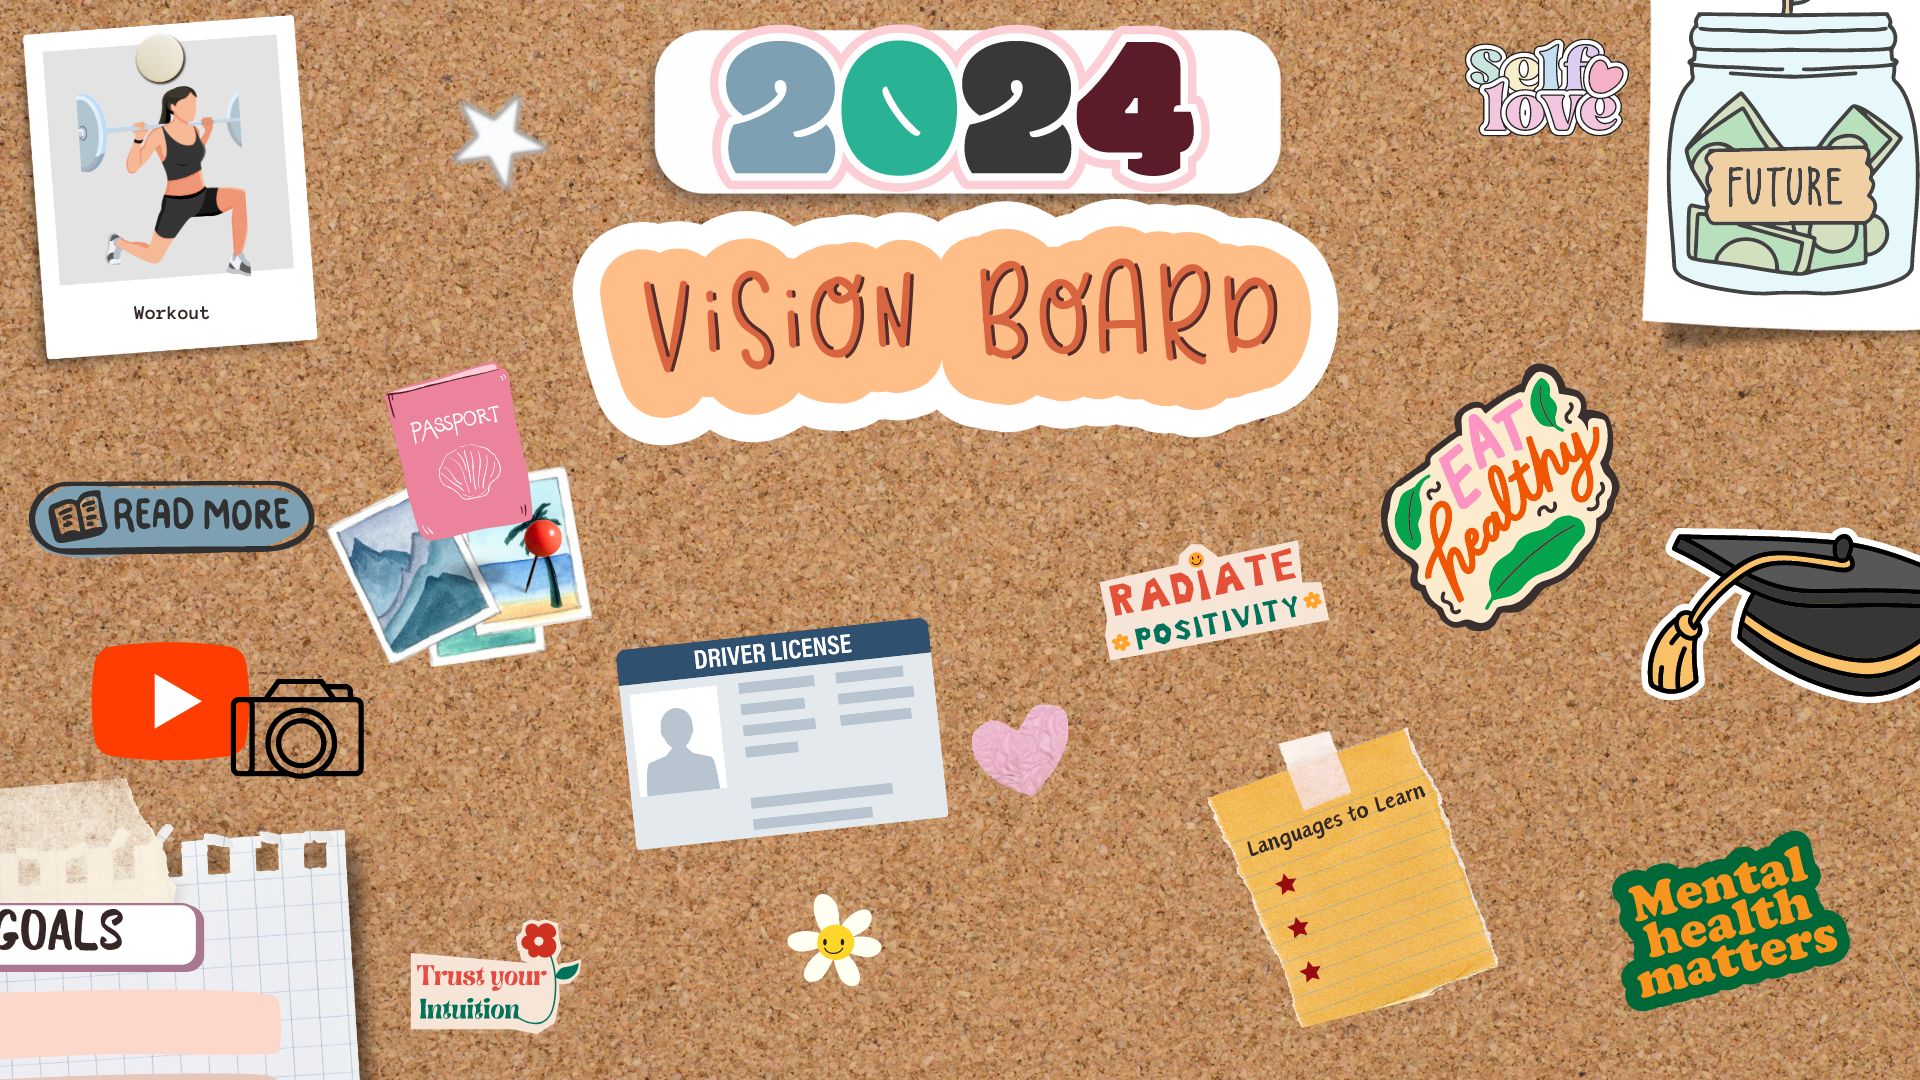 Vision Board Created by You 2024 Goals Goal Setting Motivational Board New  Year's Resolutions Visual Goal Setting DIY Goals 